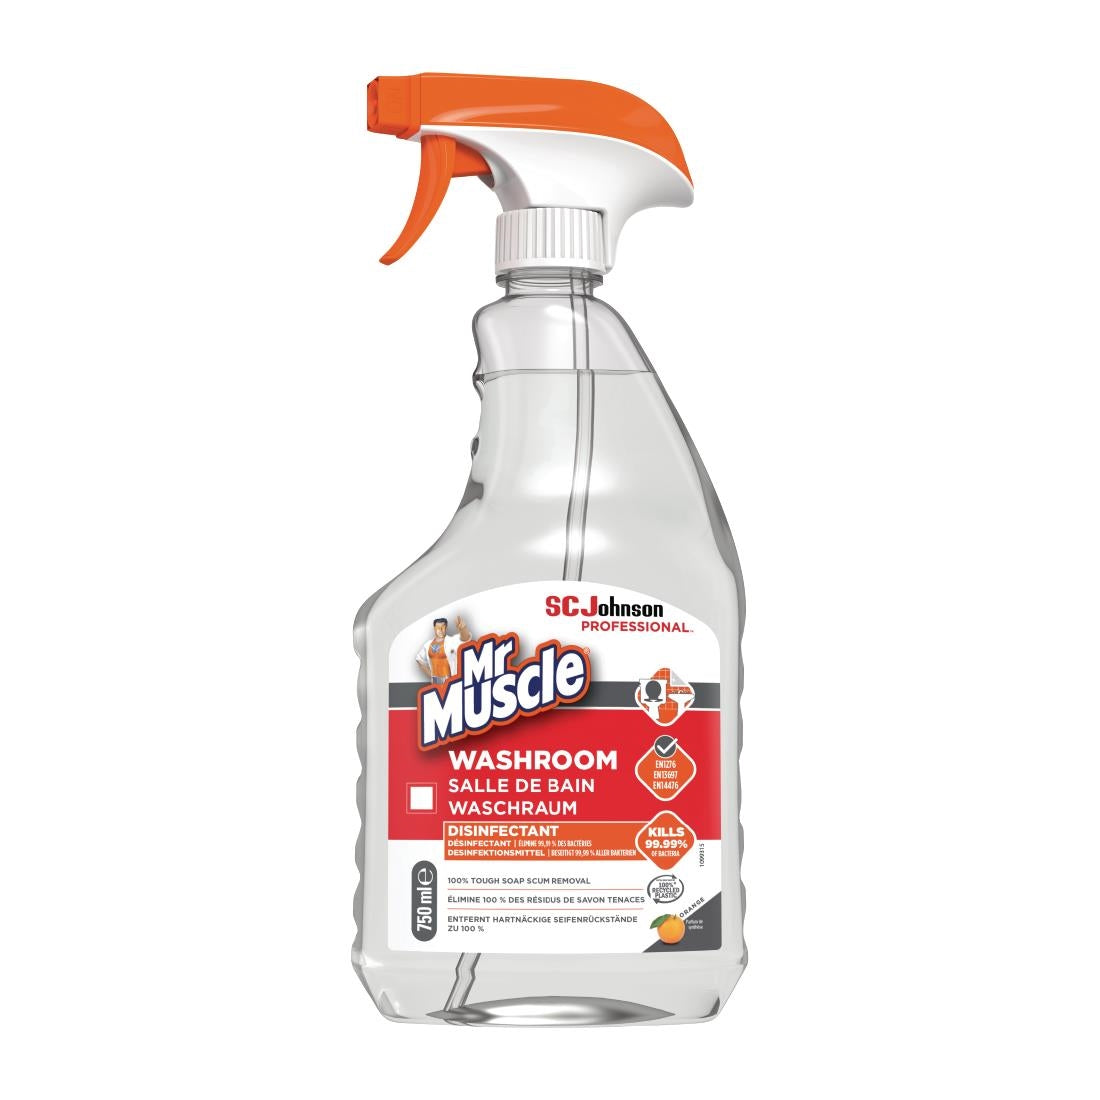 GH493 Mr Muscle Ready to Use Washroom Disinfectant Orange 750ml JD Catering Equipment Solutions Ltd